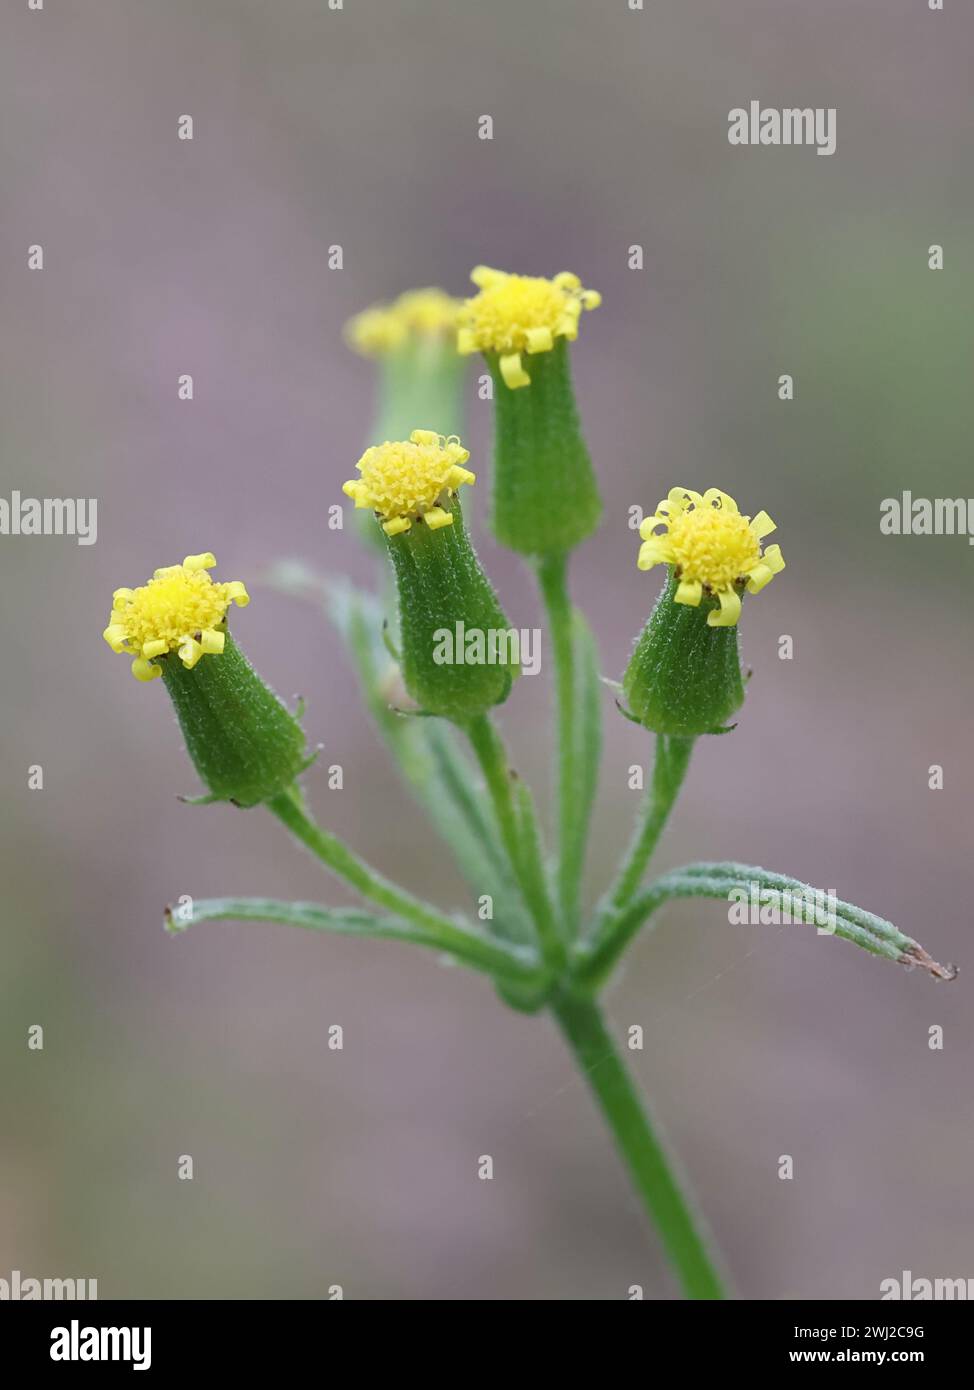 Sticky Groundsel, Senecio viscosus, also known as Sticky ragwort or Stinking groundsel, wild flowering plant from Finland Stock Photo